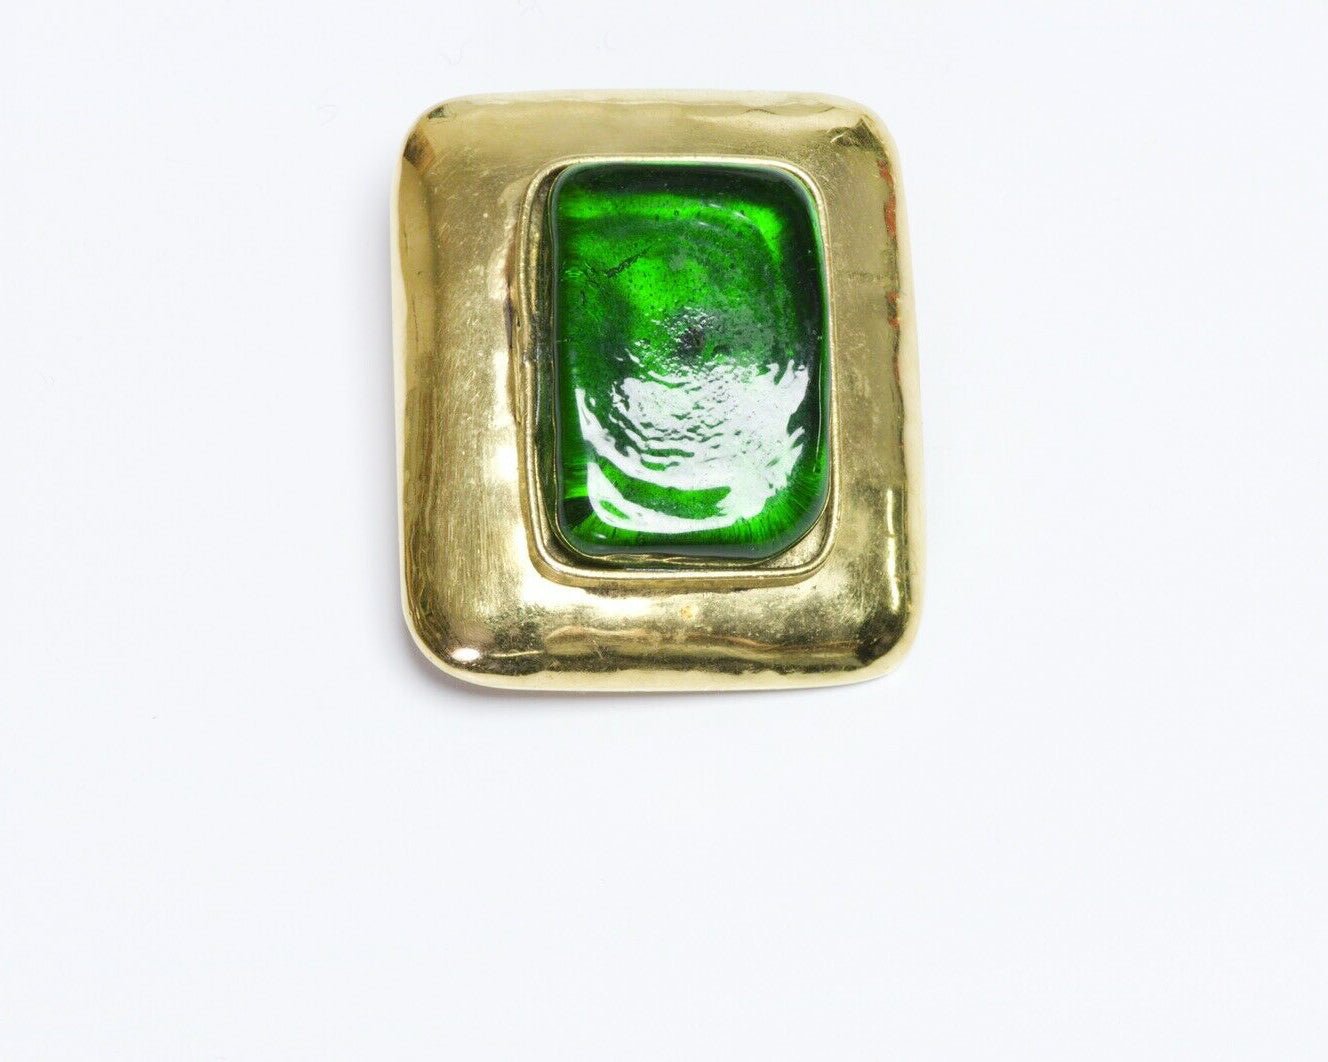 Frances Patiky Stein FPS Paris 1980’s Gold Plated Green Poured Glass Brooch